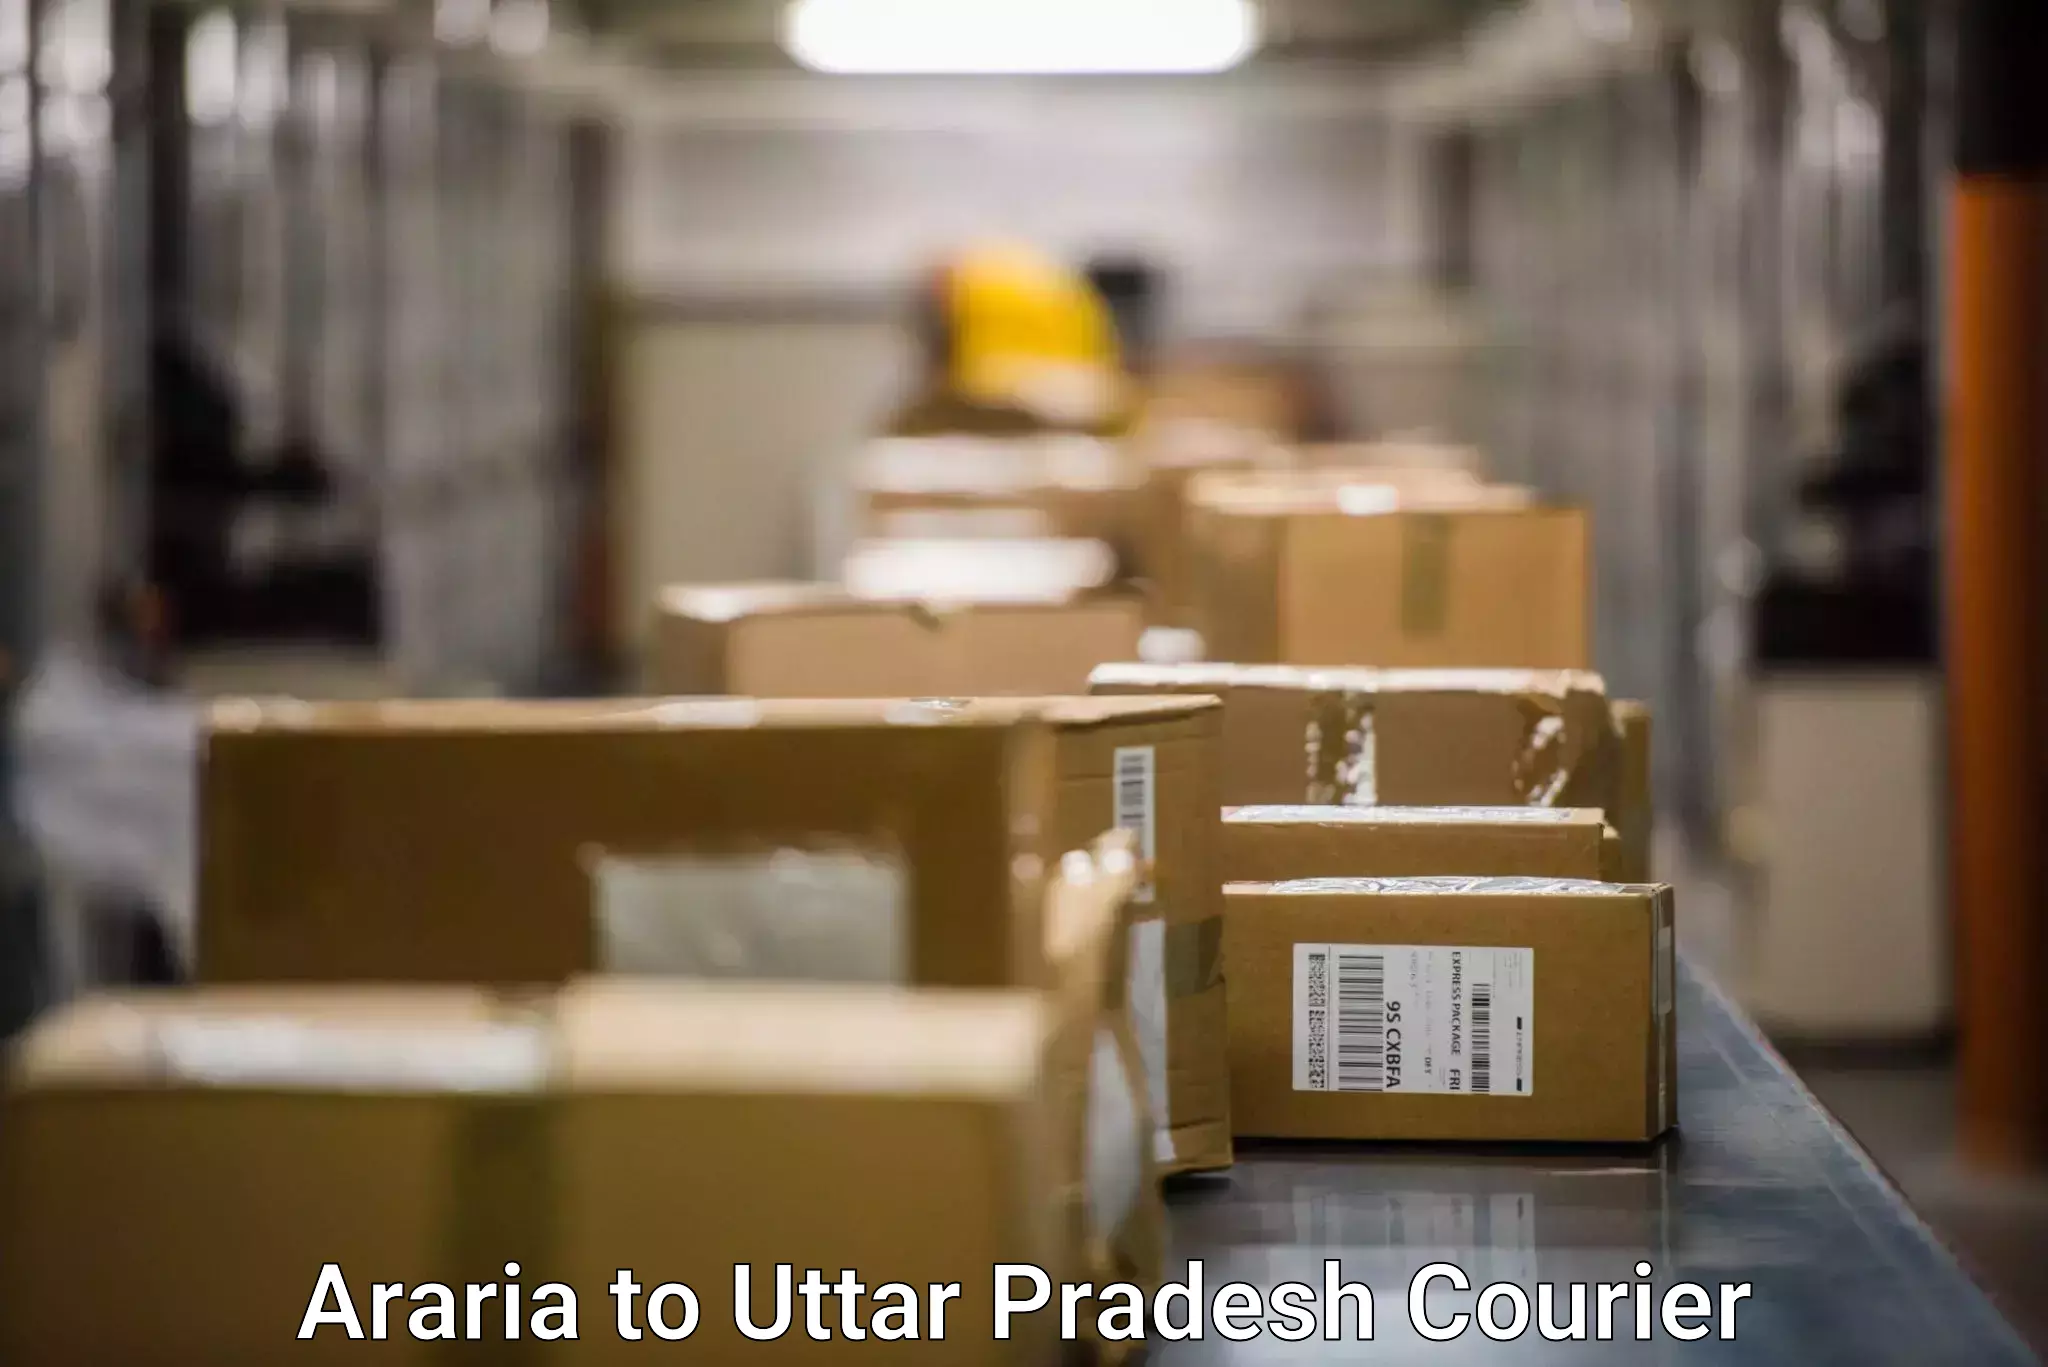 Courier services in Araria to Aligarh